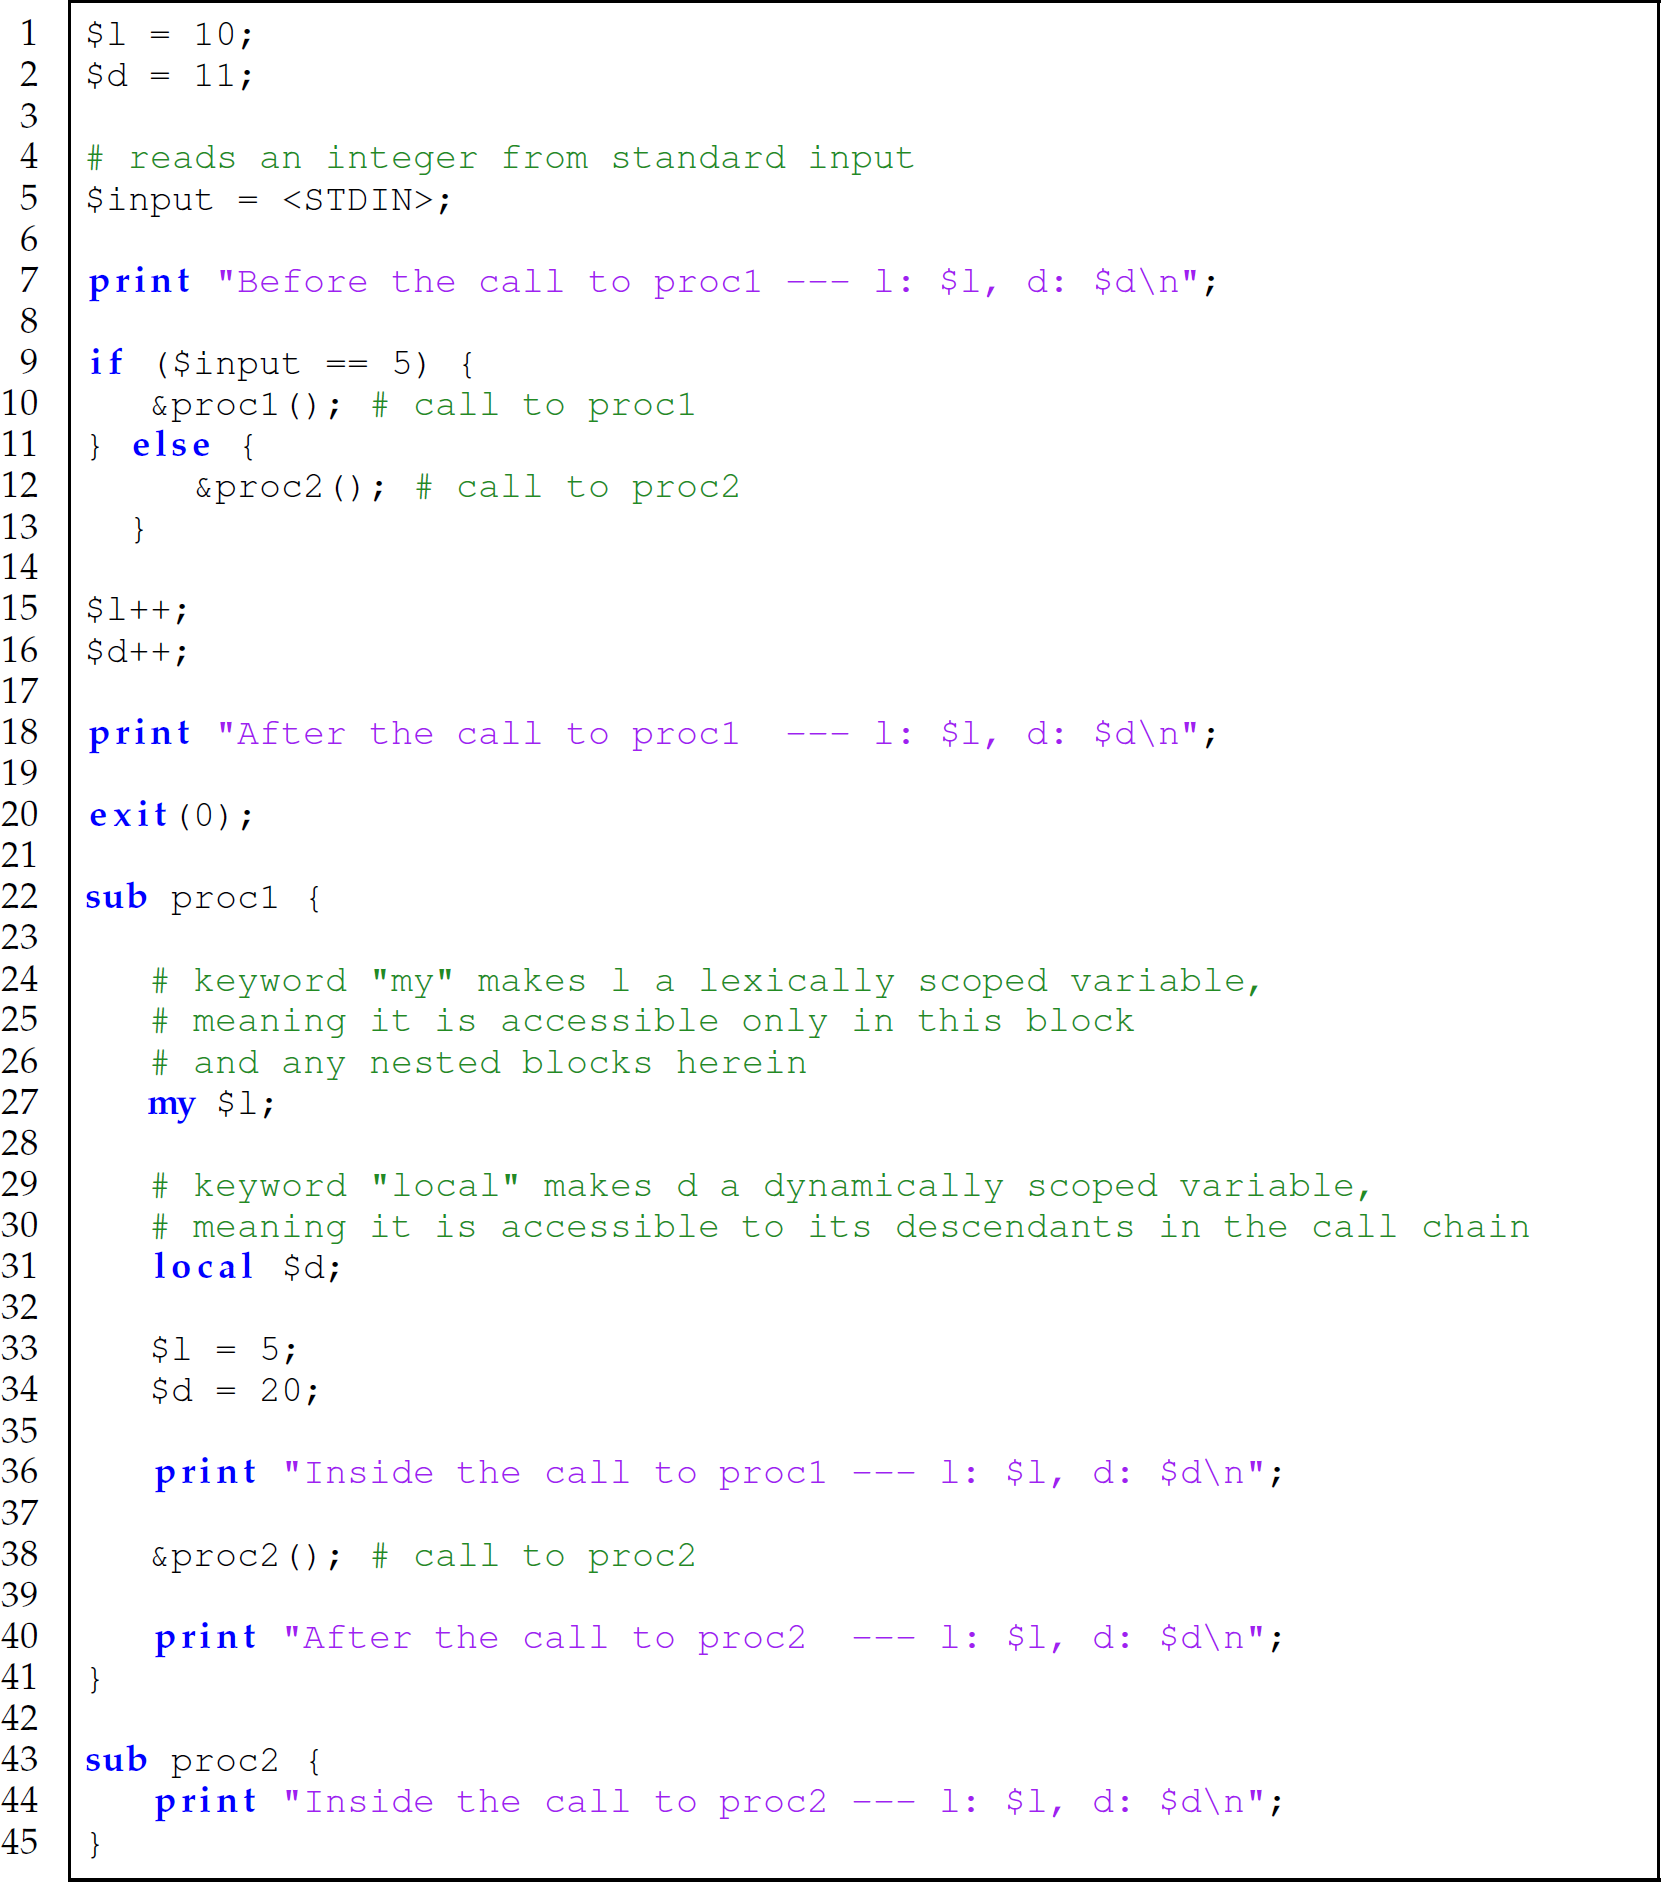 A set of 45 code lines in a Perl program for demonstrating dynamic scooping.